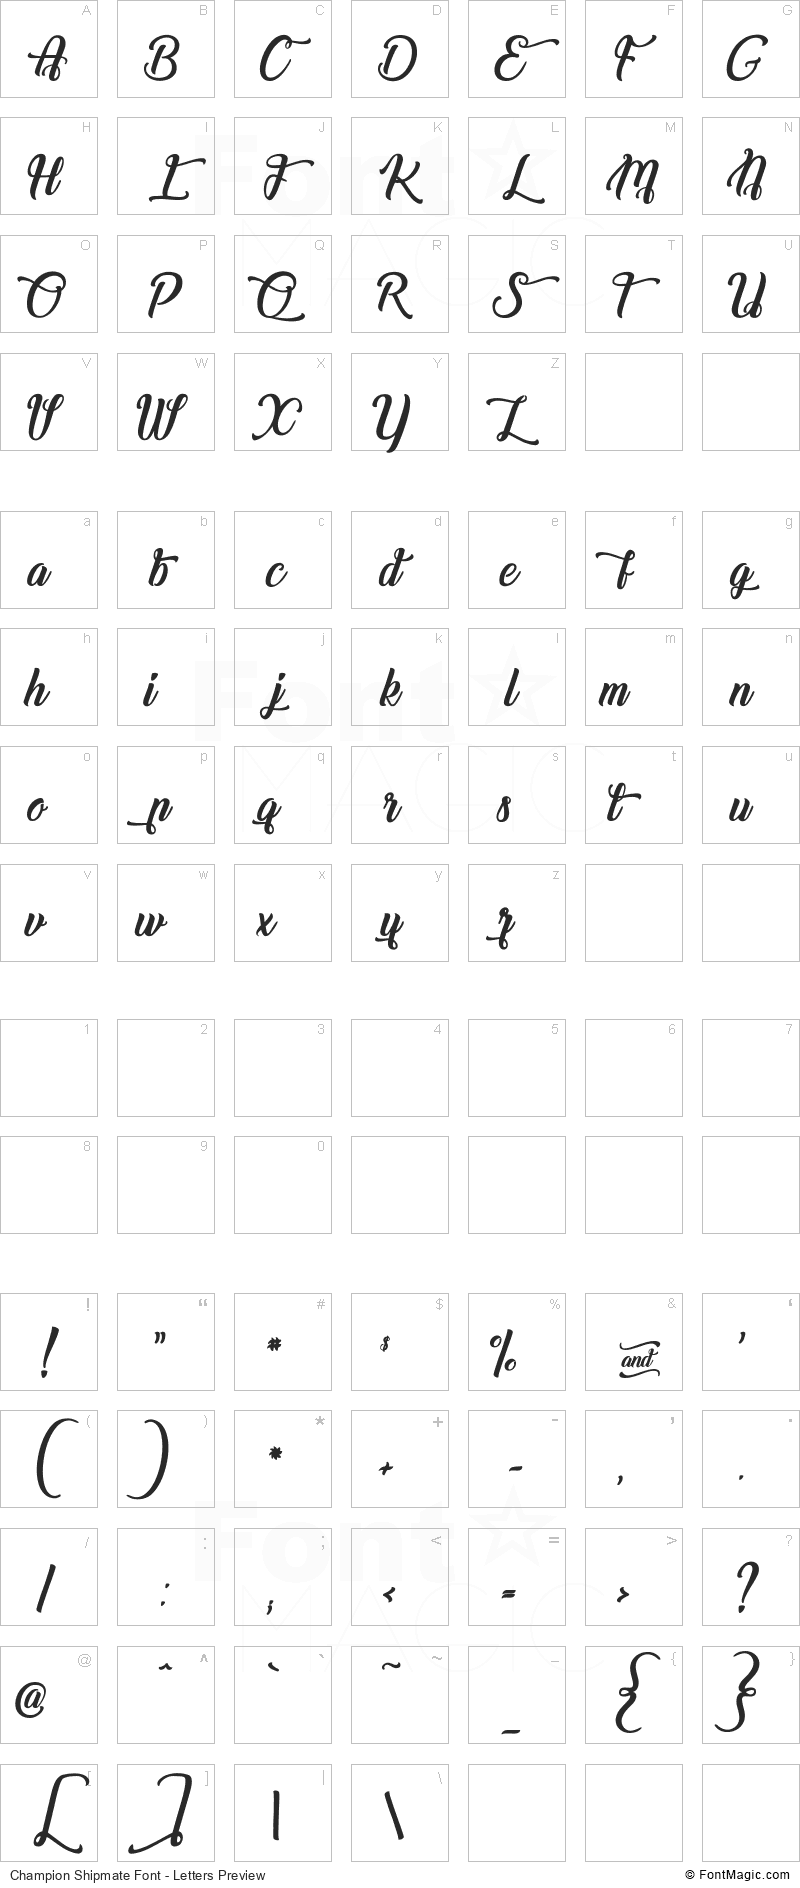 Champion Shipmate Font - All Latters Preview Chart